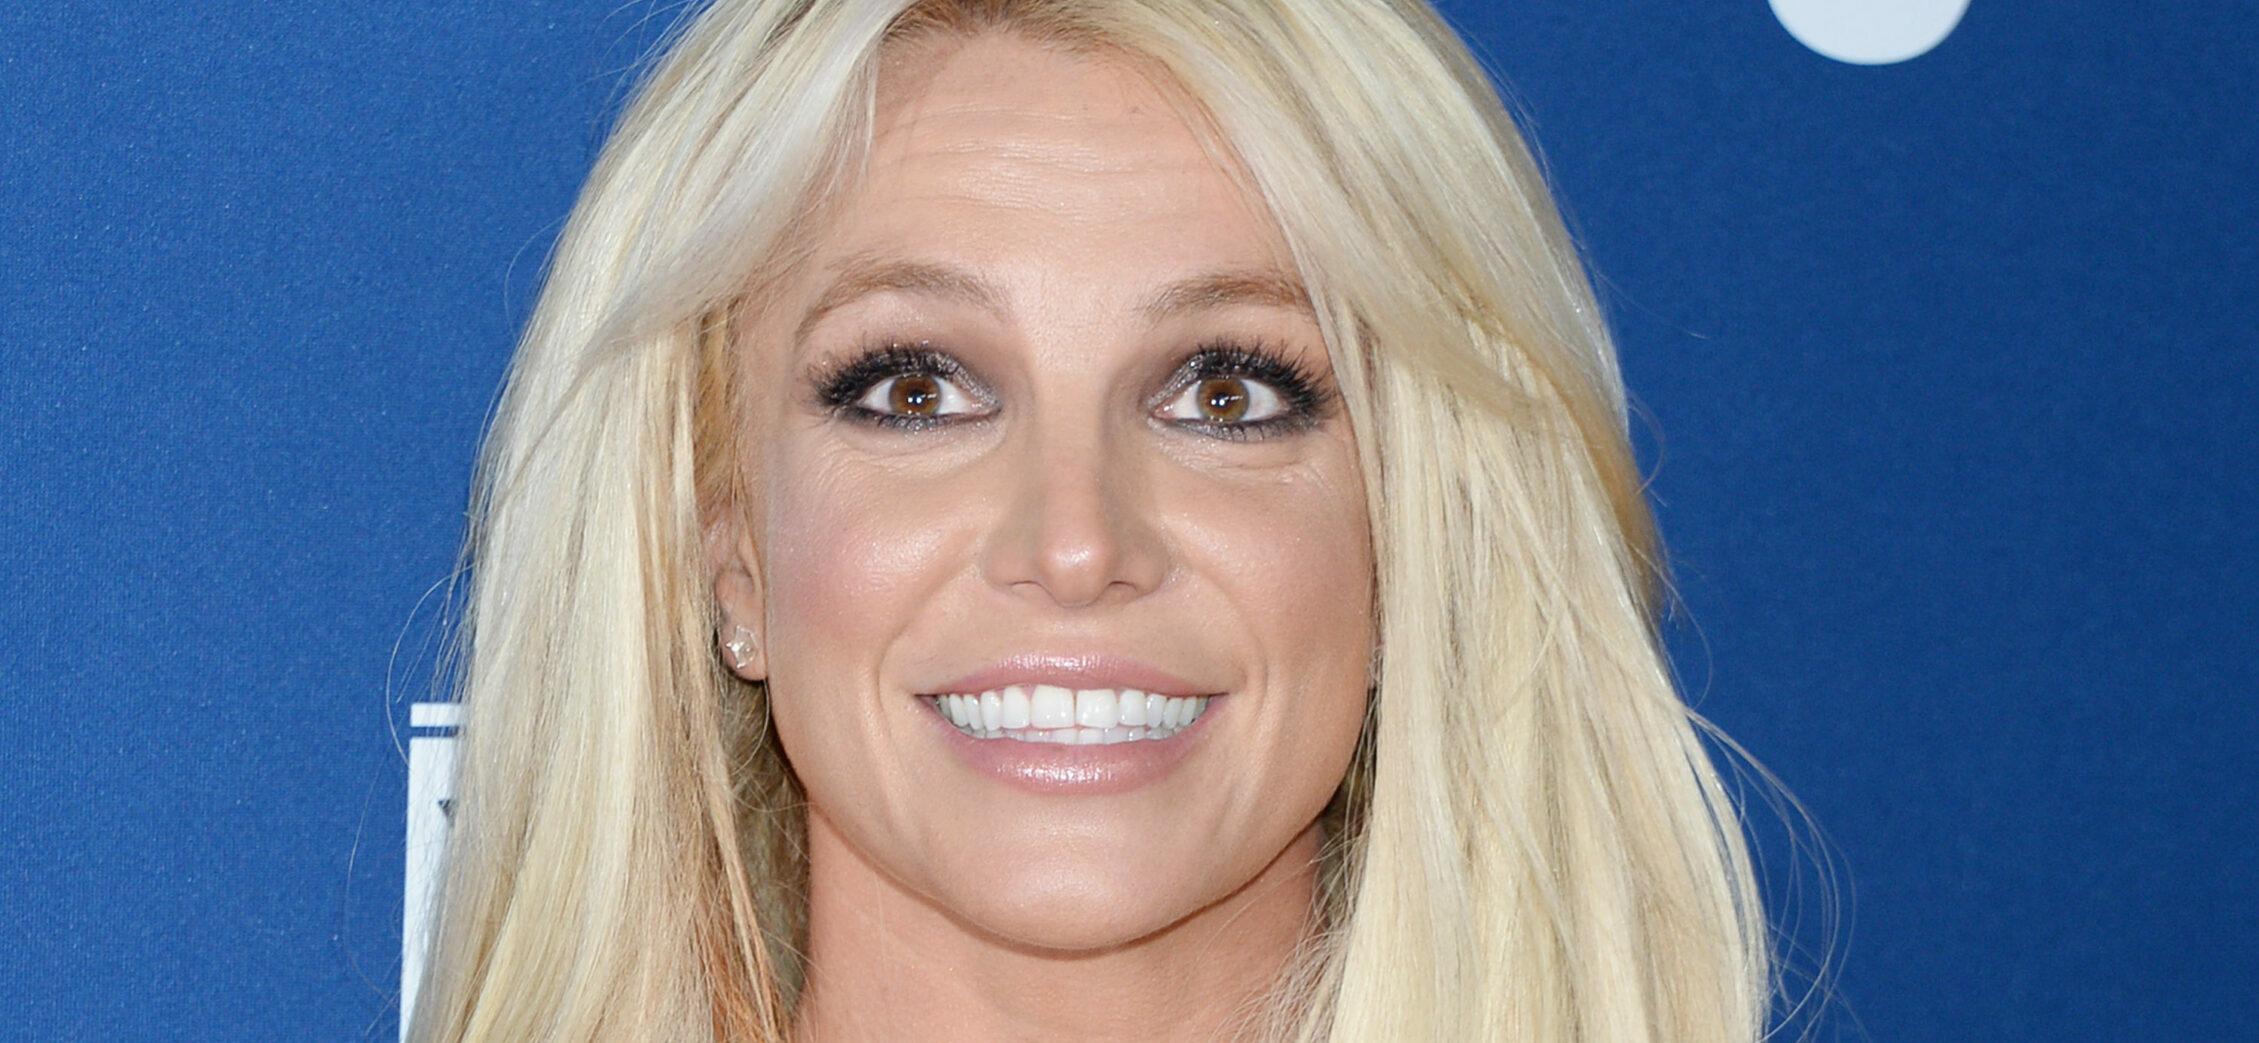 Find Out Why Britney Spears Once BEGGED For A Burger!